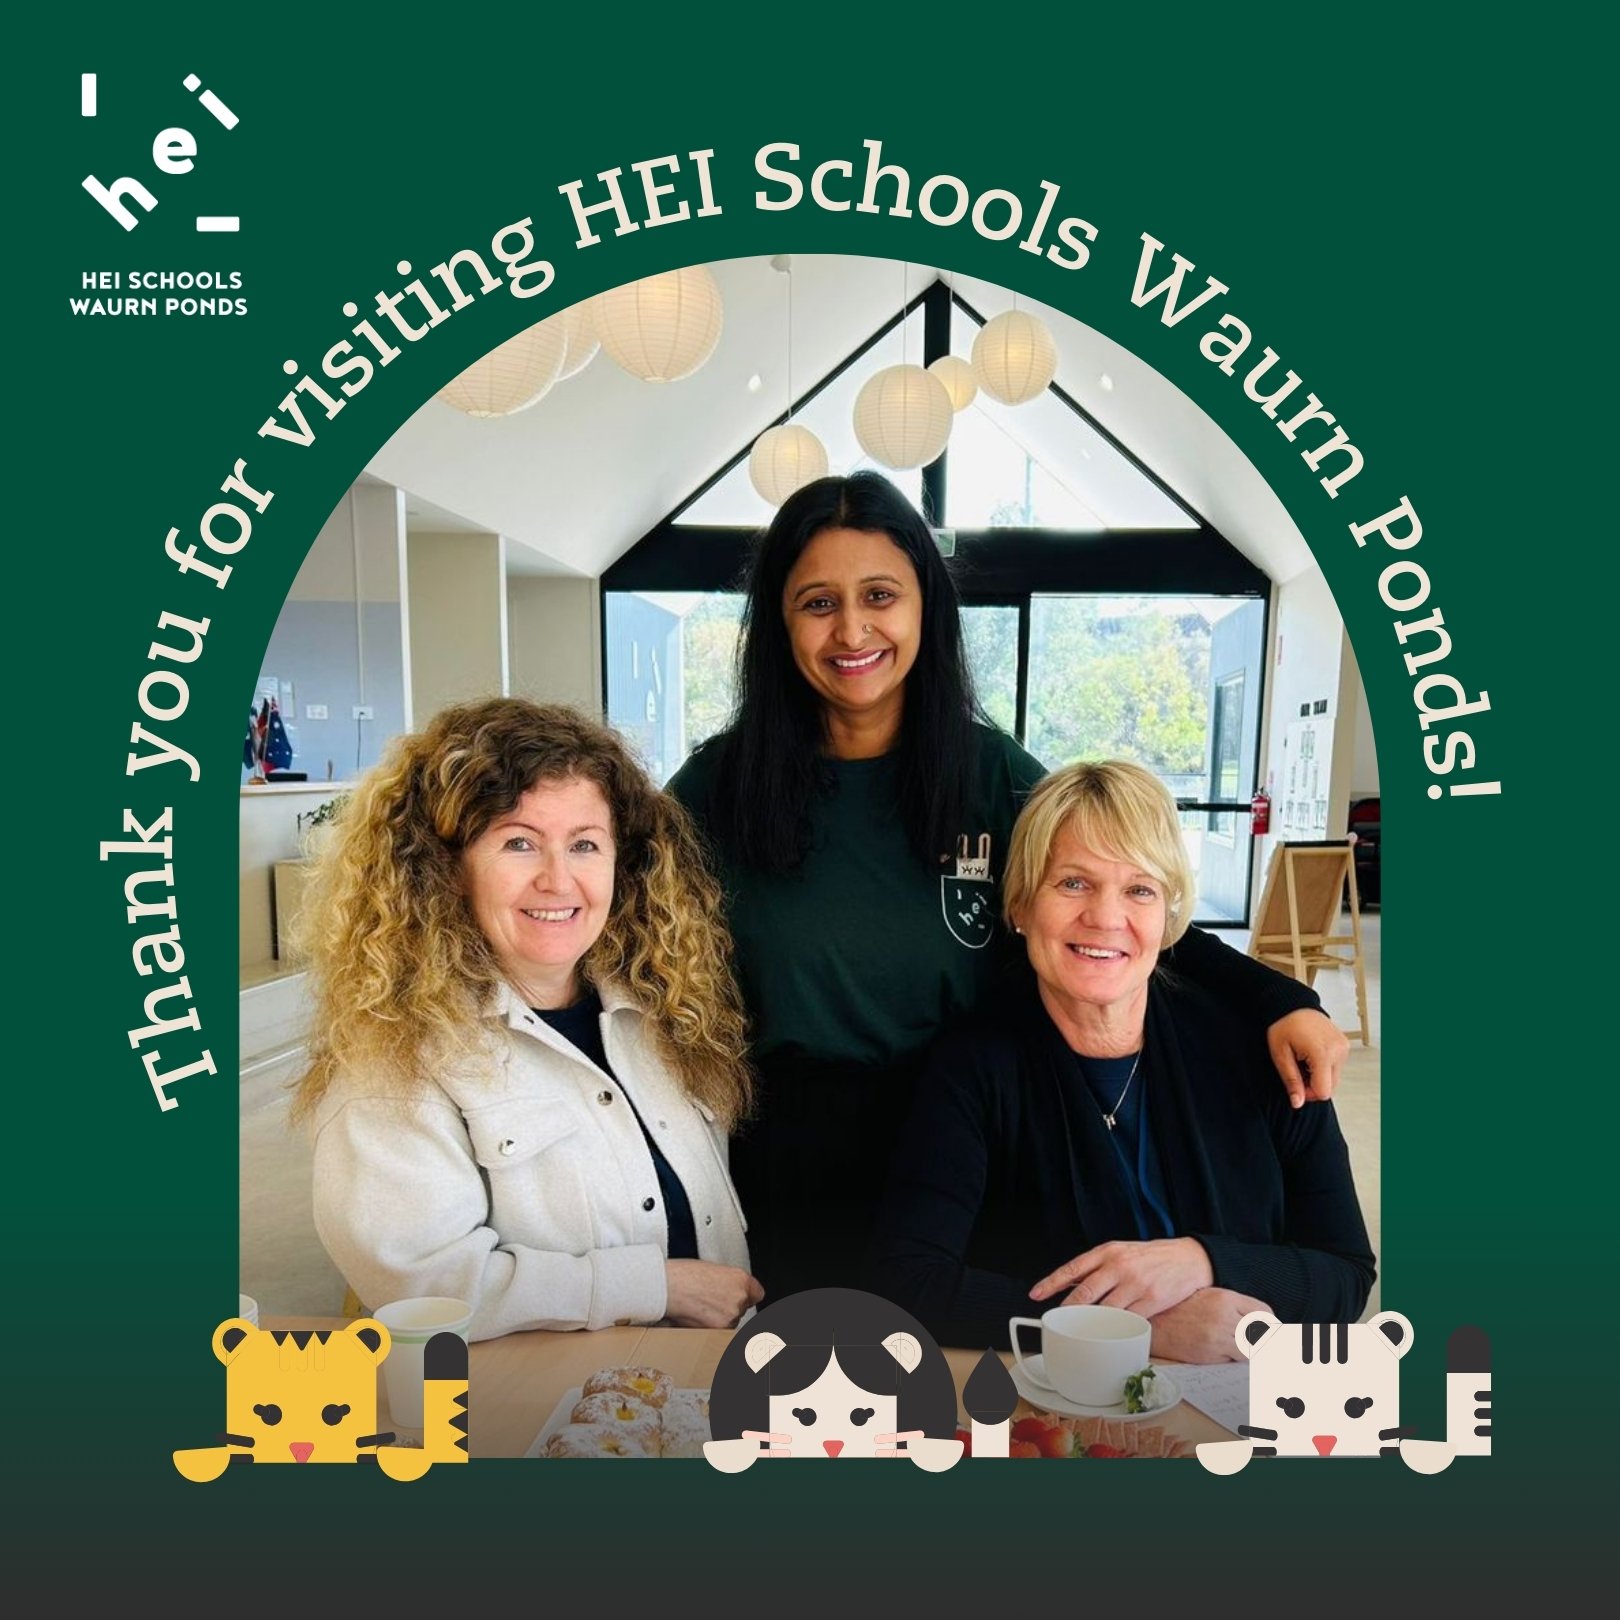 Last week, we were fortunate to have our Finnish mentors, Paula and Annukka from HEI Schools Headquarters, visit HEI Schools Waurn Ponds. Their visit was incredibly valuable, providing us with acute observations and encouraging advice on our daily pr